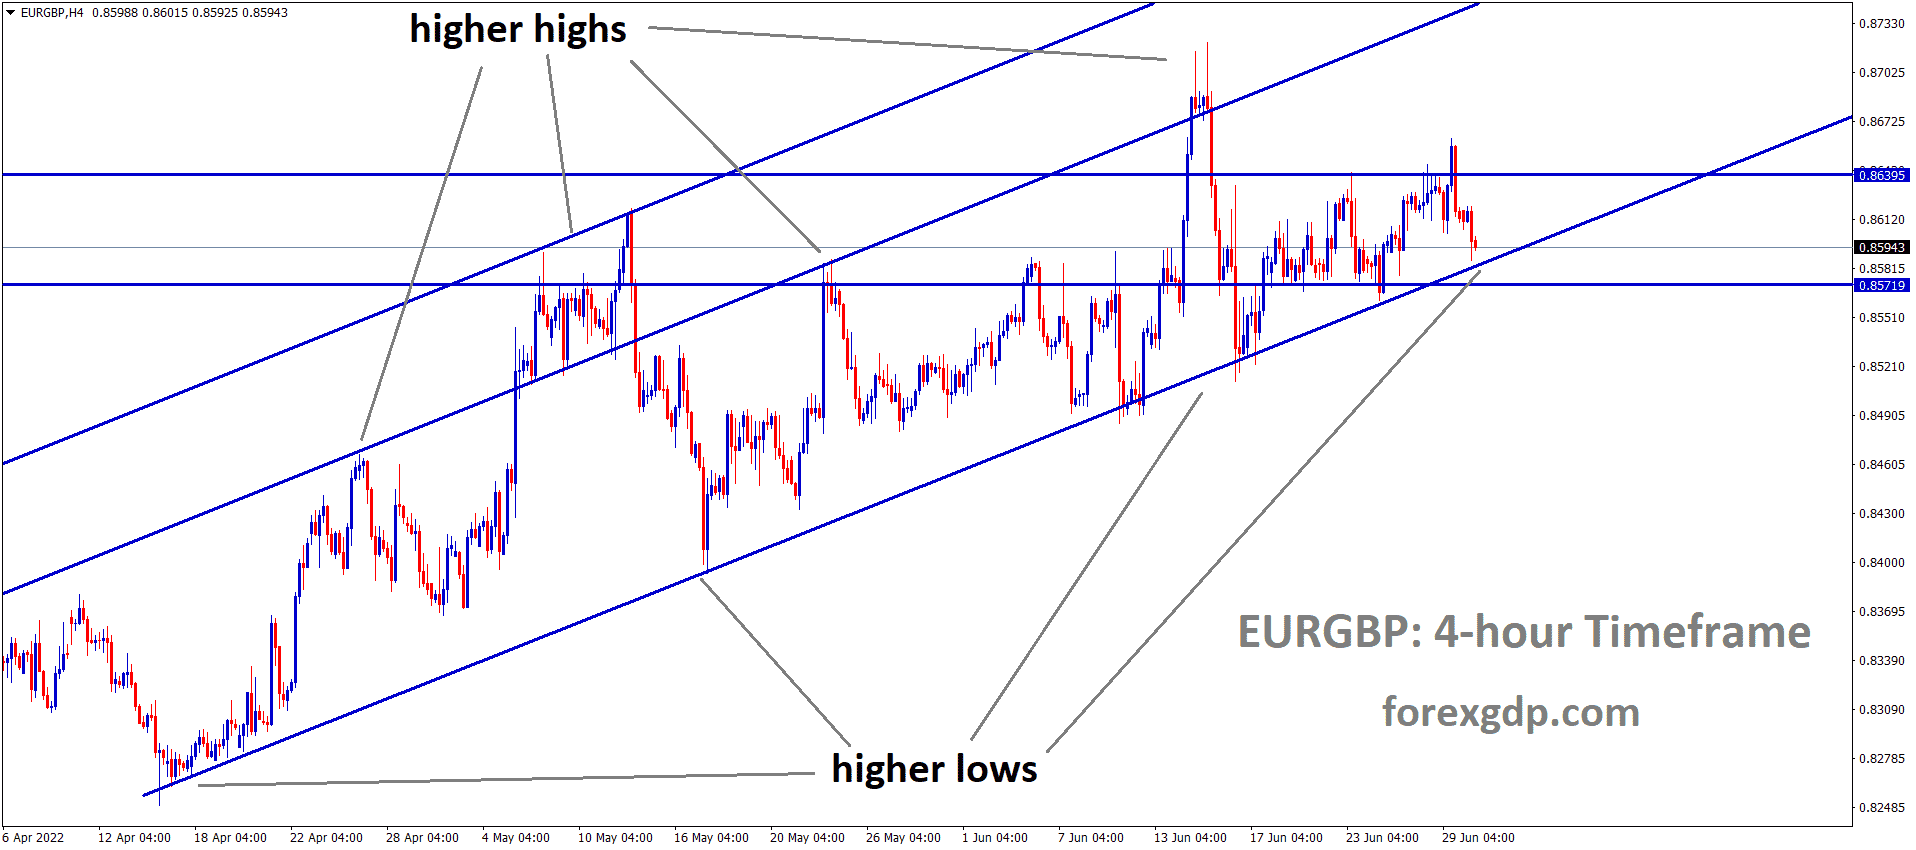 EURGBP is moving in an Ascending channel and the Market has reached the Higher low area of the channel